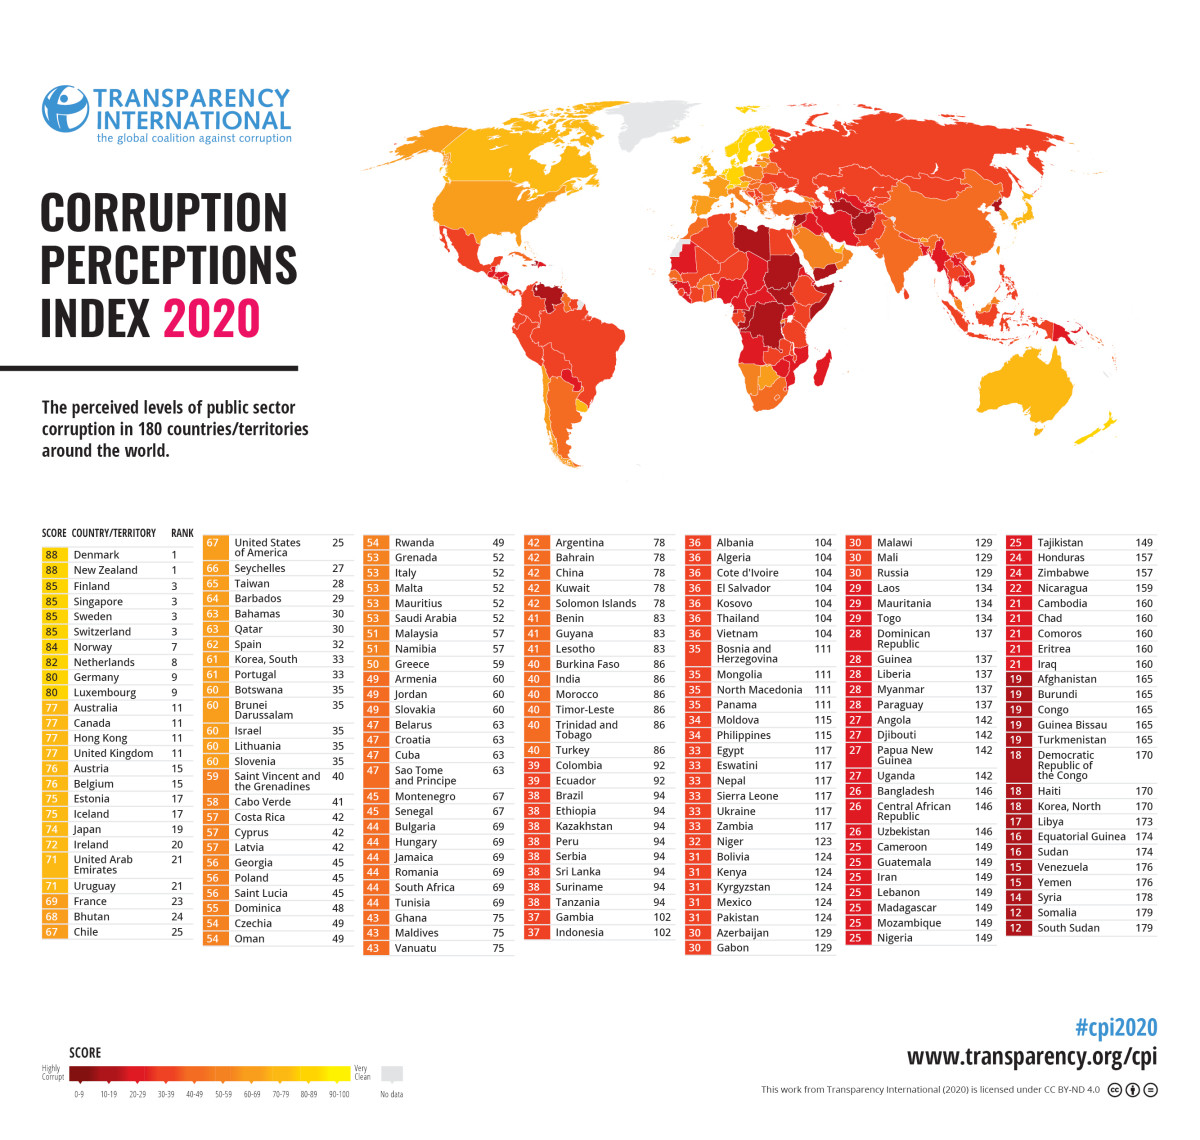 Russia and Ukraine are quite close on the corruption scales so far as can be ascertained 